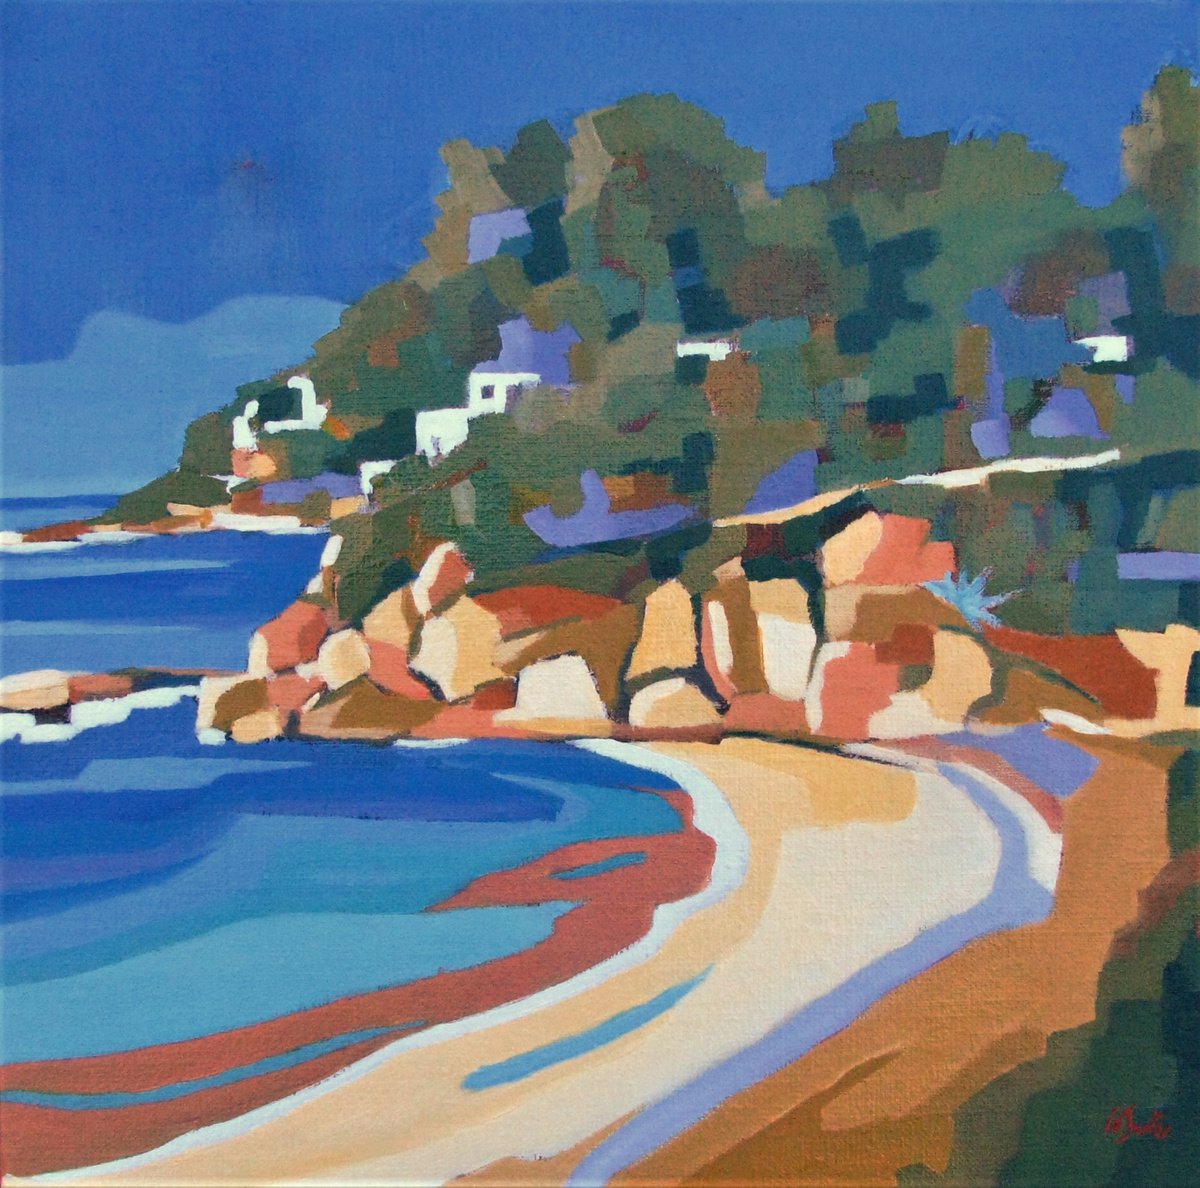 The ’billionaires cove’ beach in Antibes by Jean-Noel Le Junter